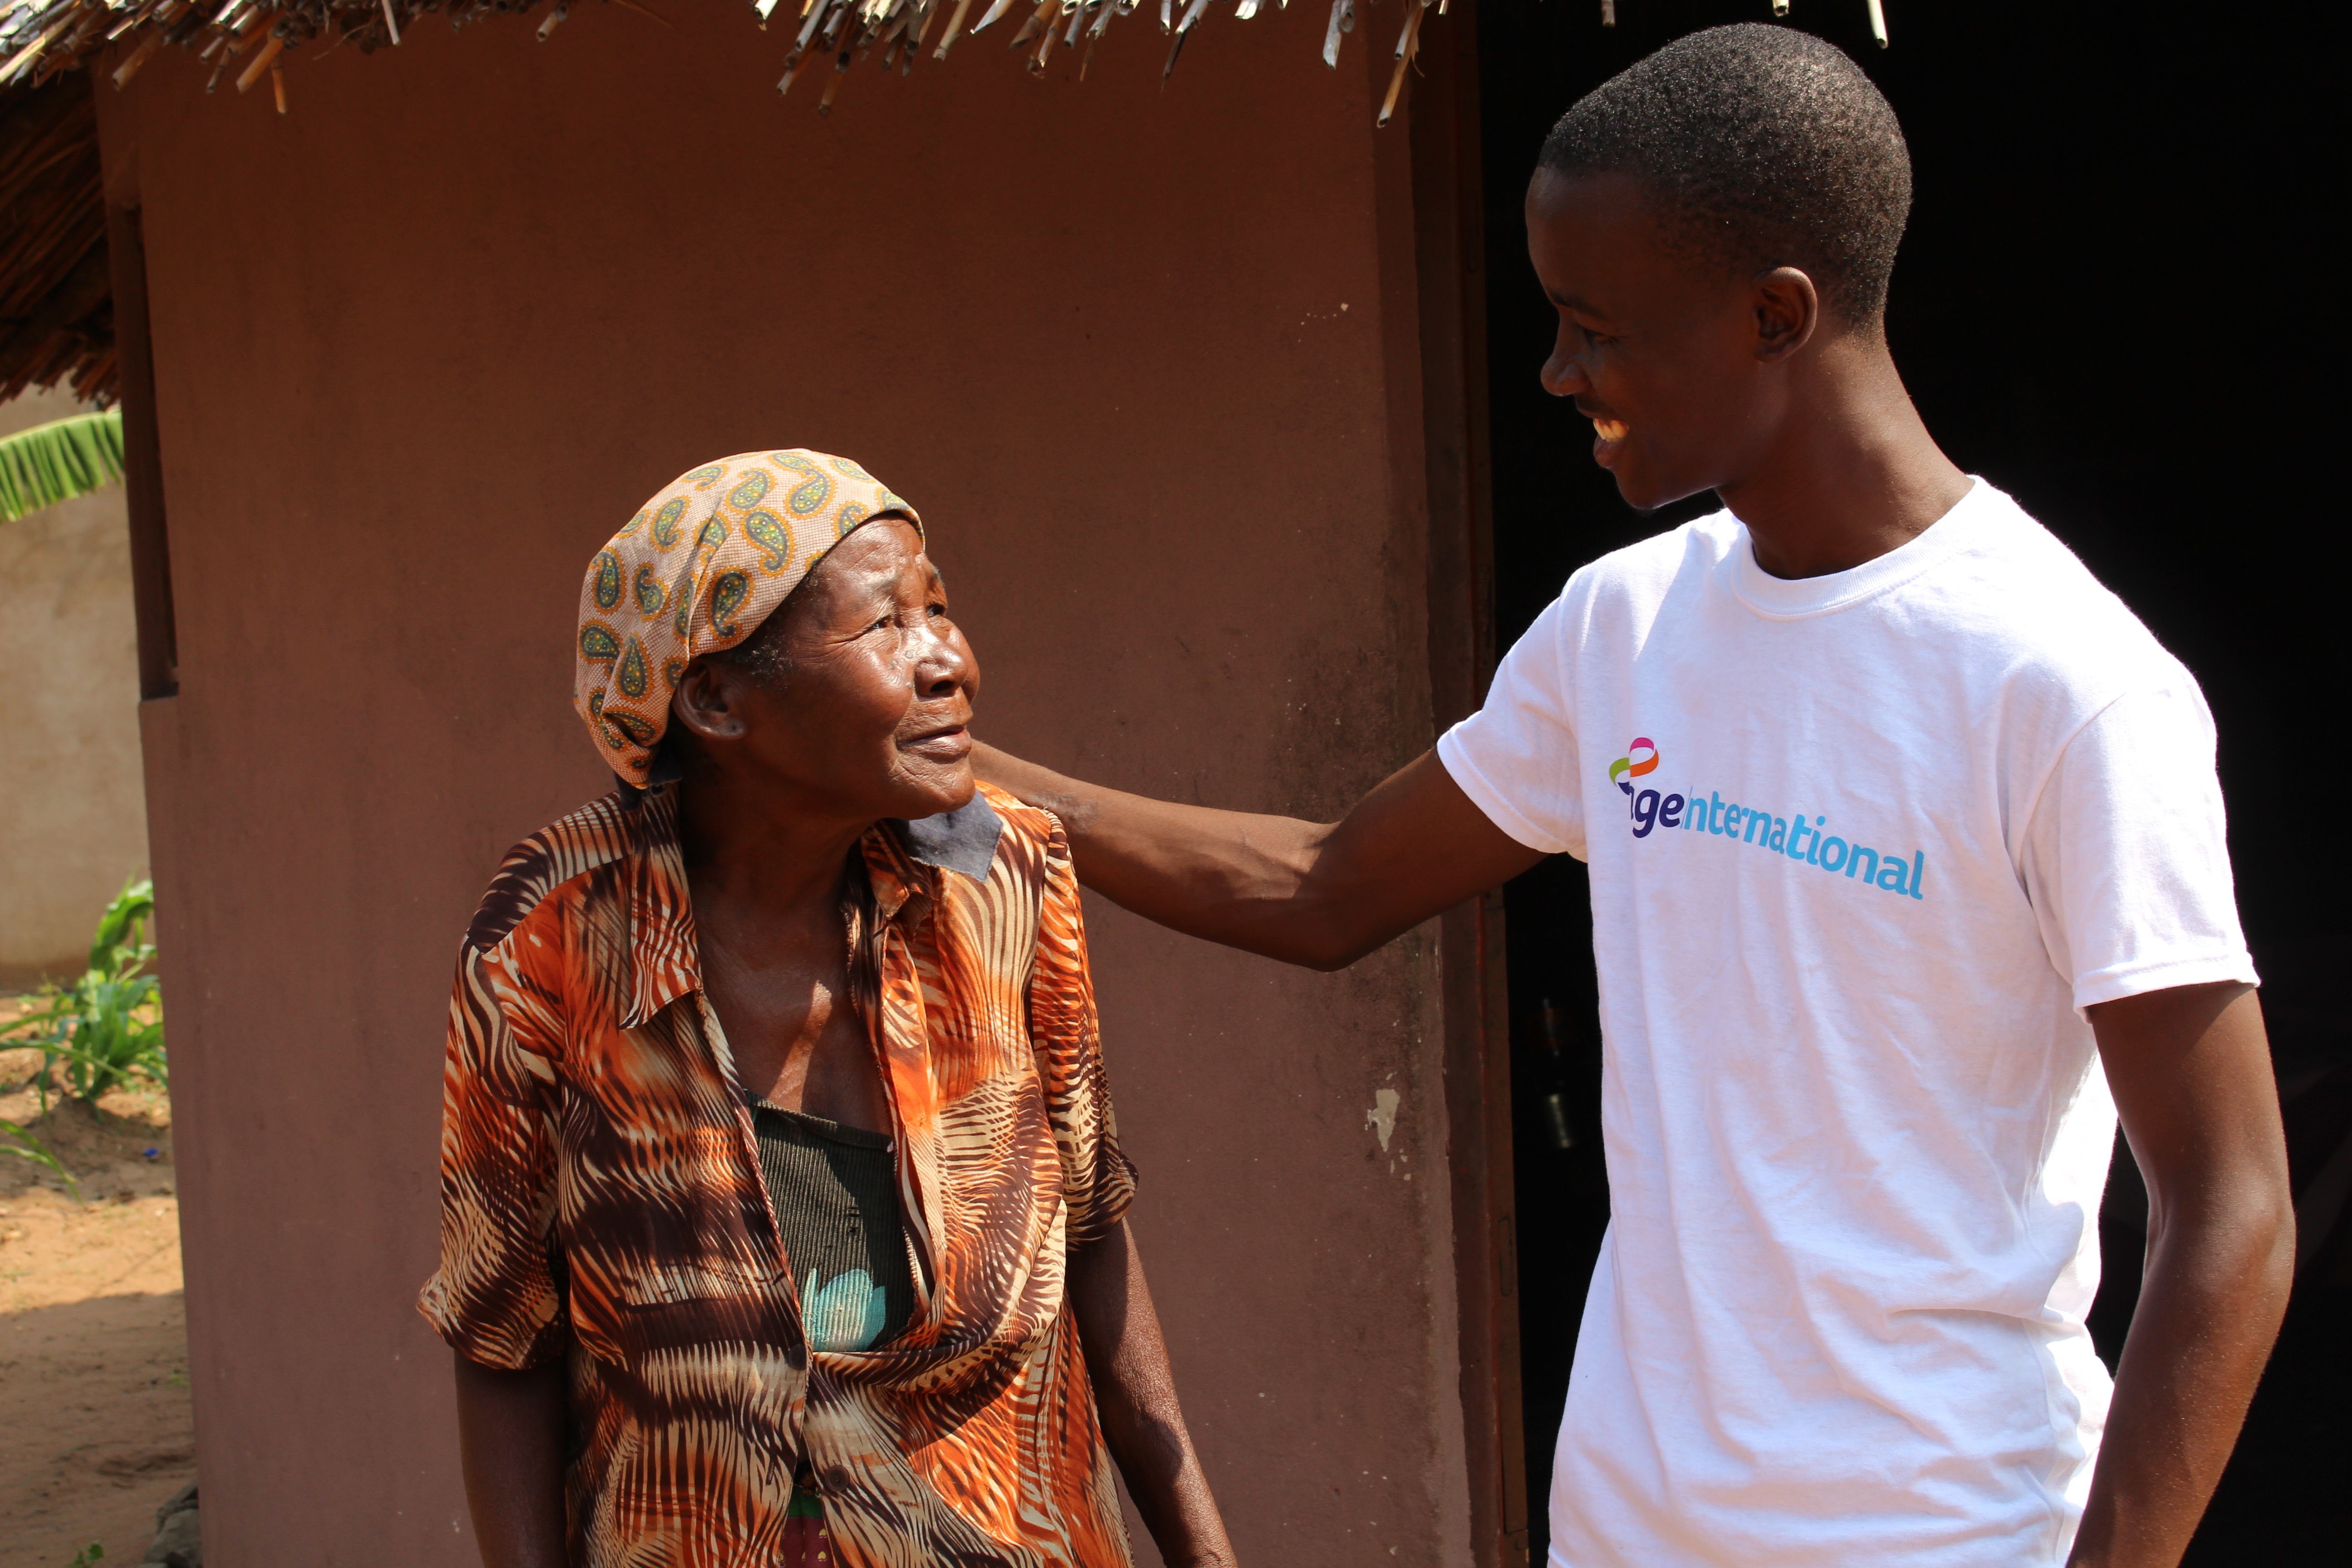 Carolina and her carer in Mozambique